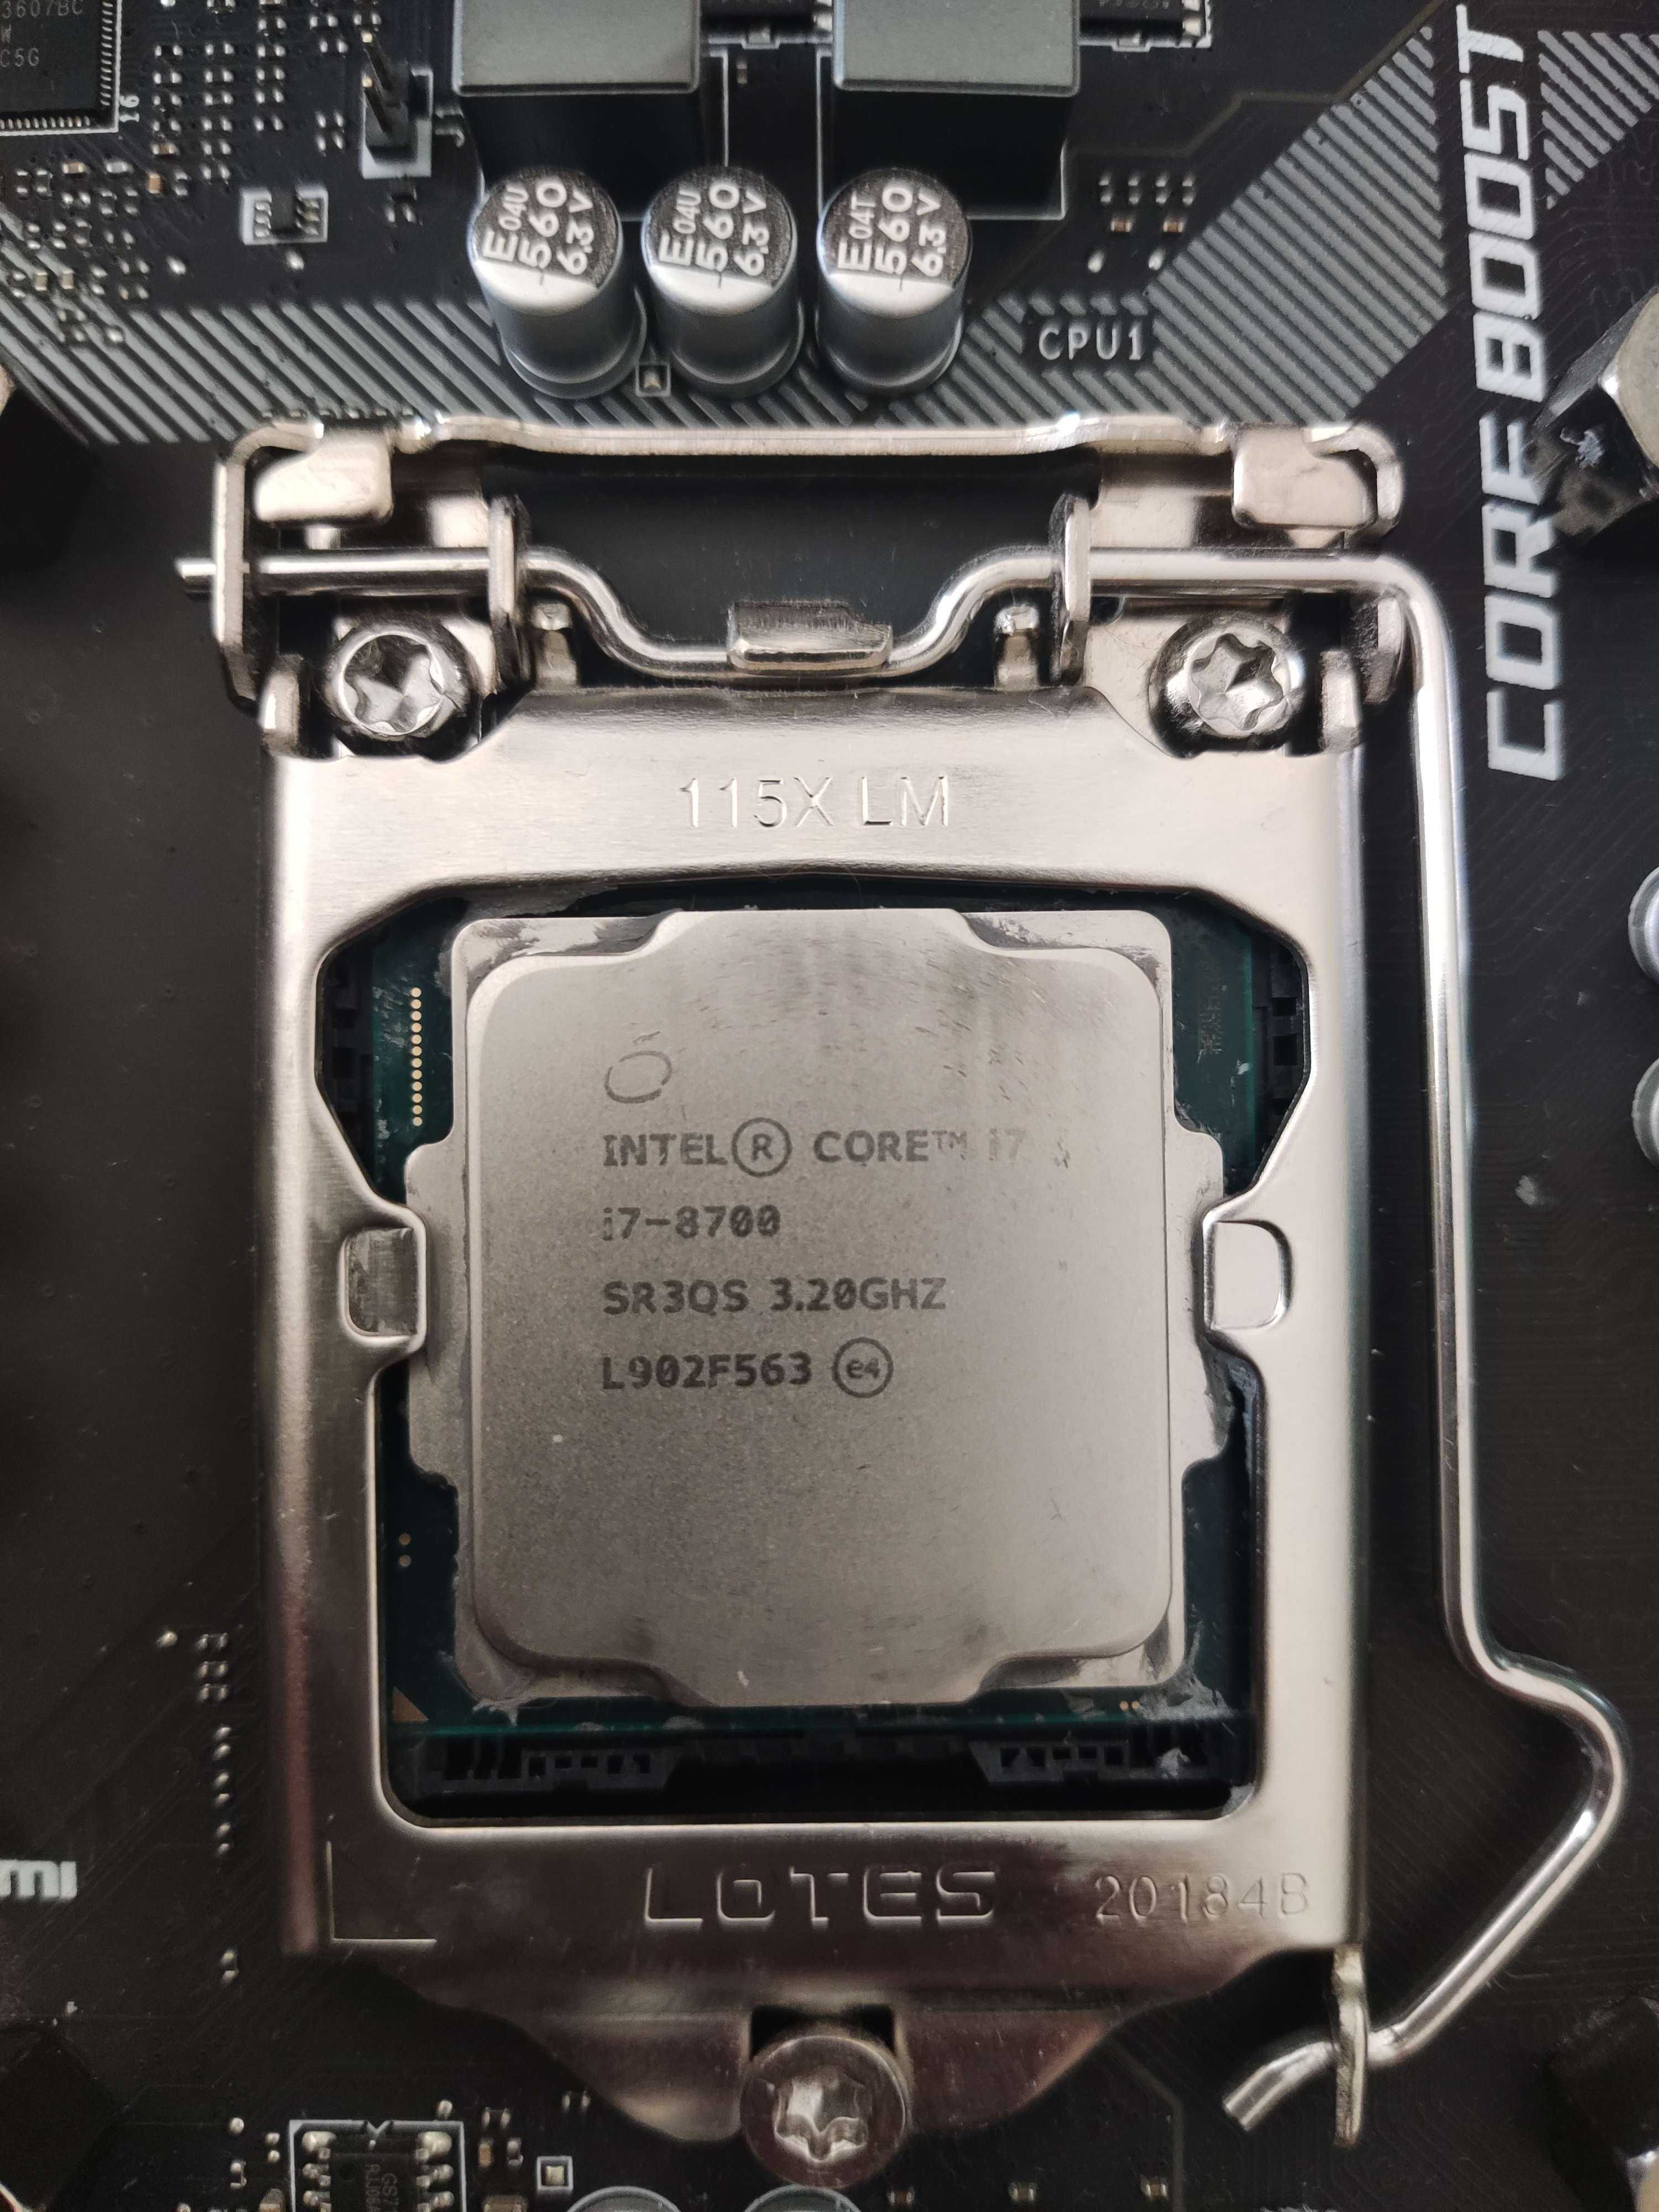 Intel Core i7 8700 3.20GHz 4.6GHz Turbo + Cooler